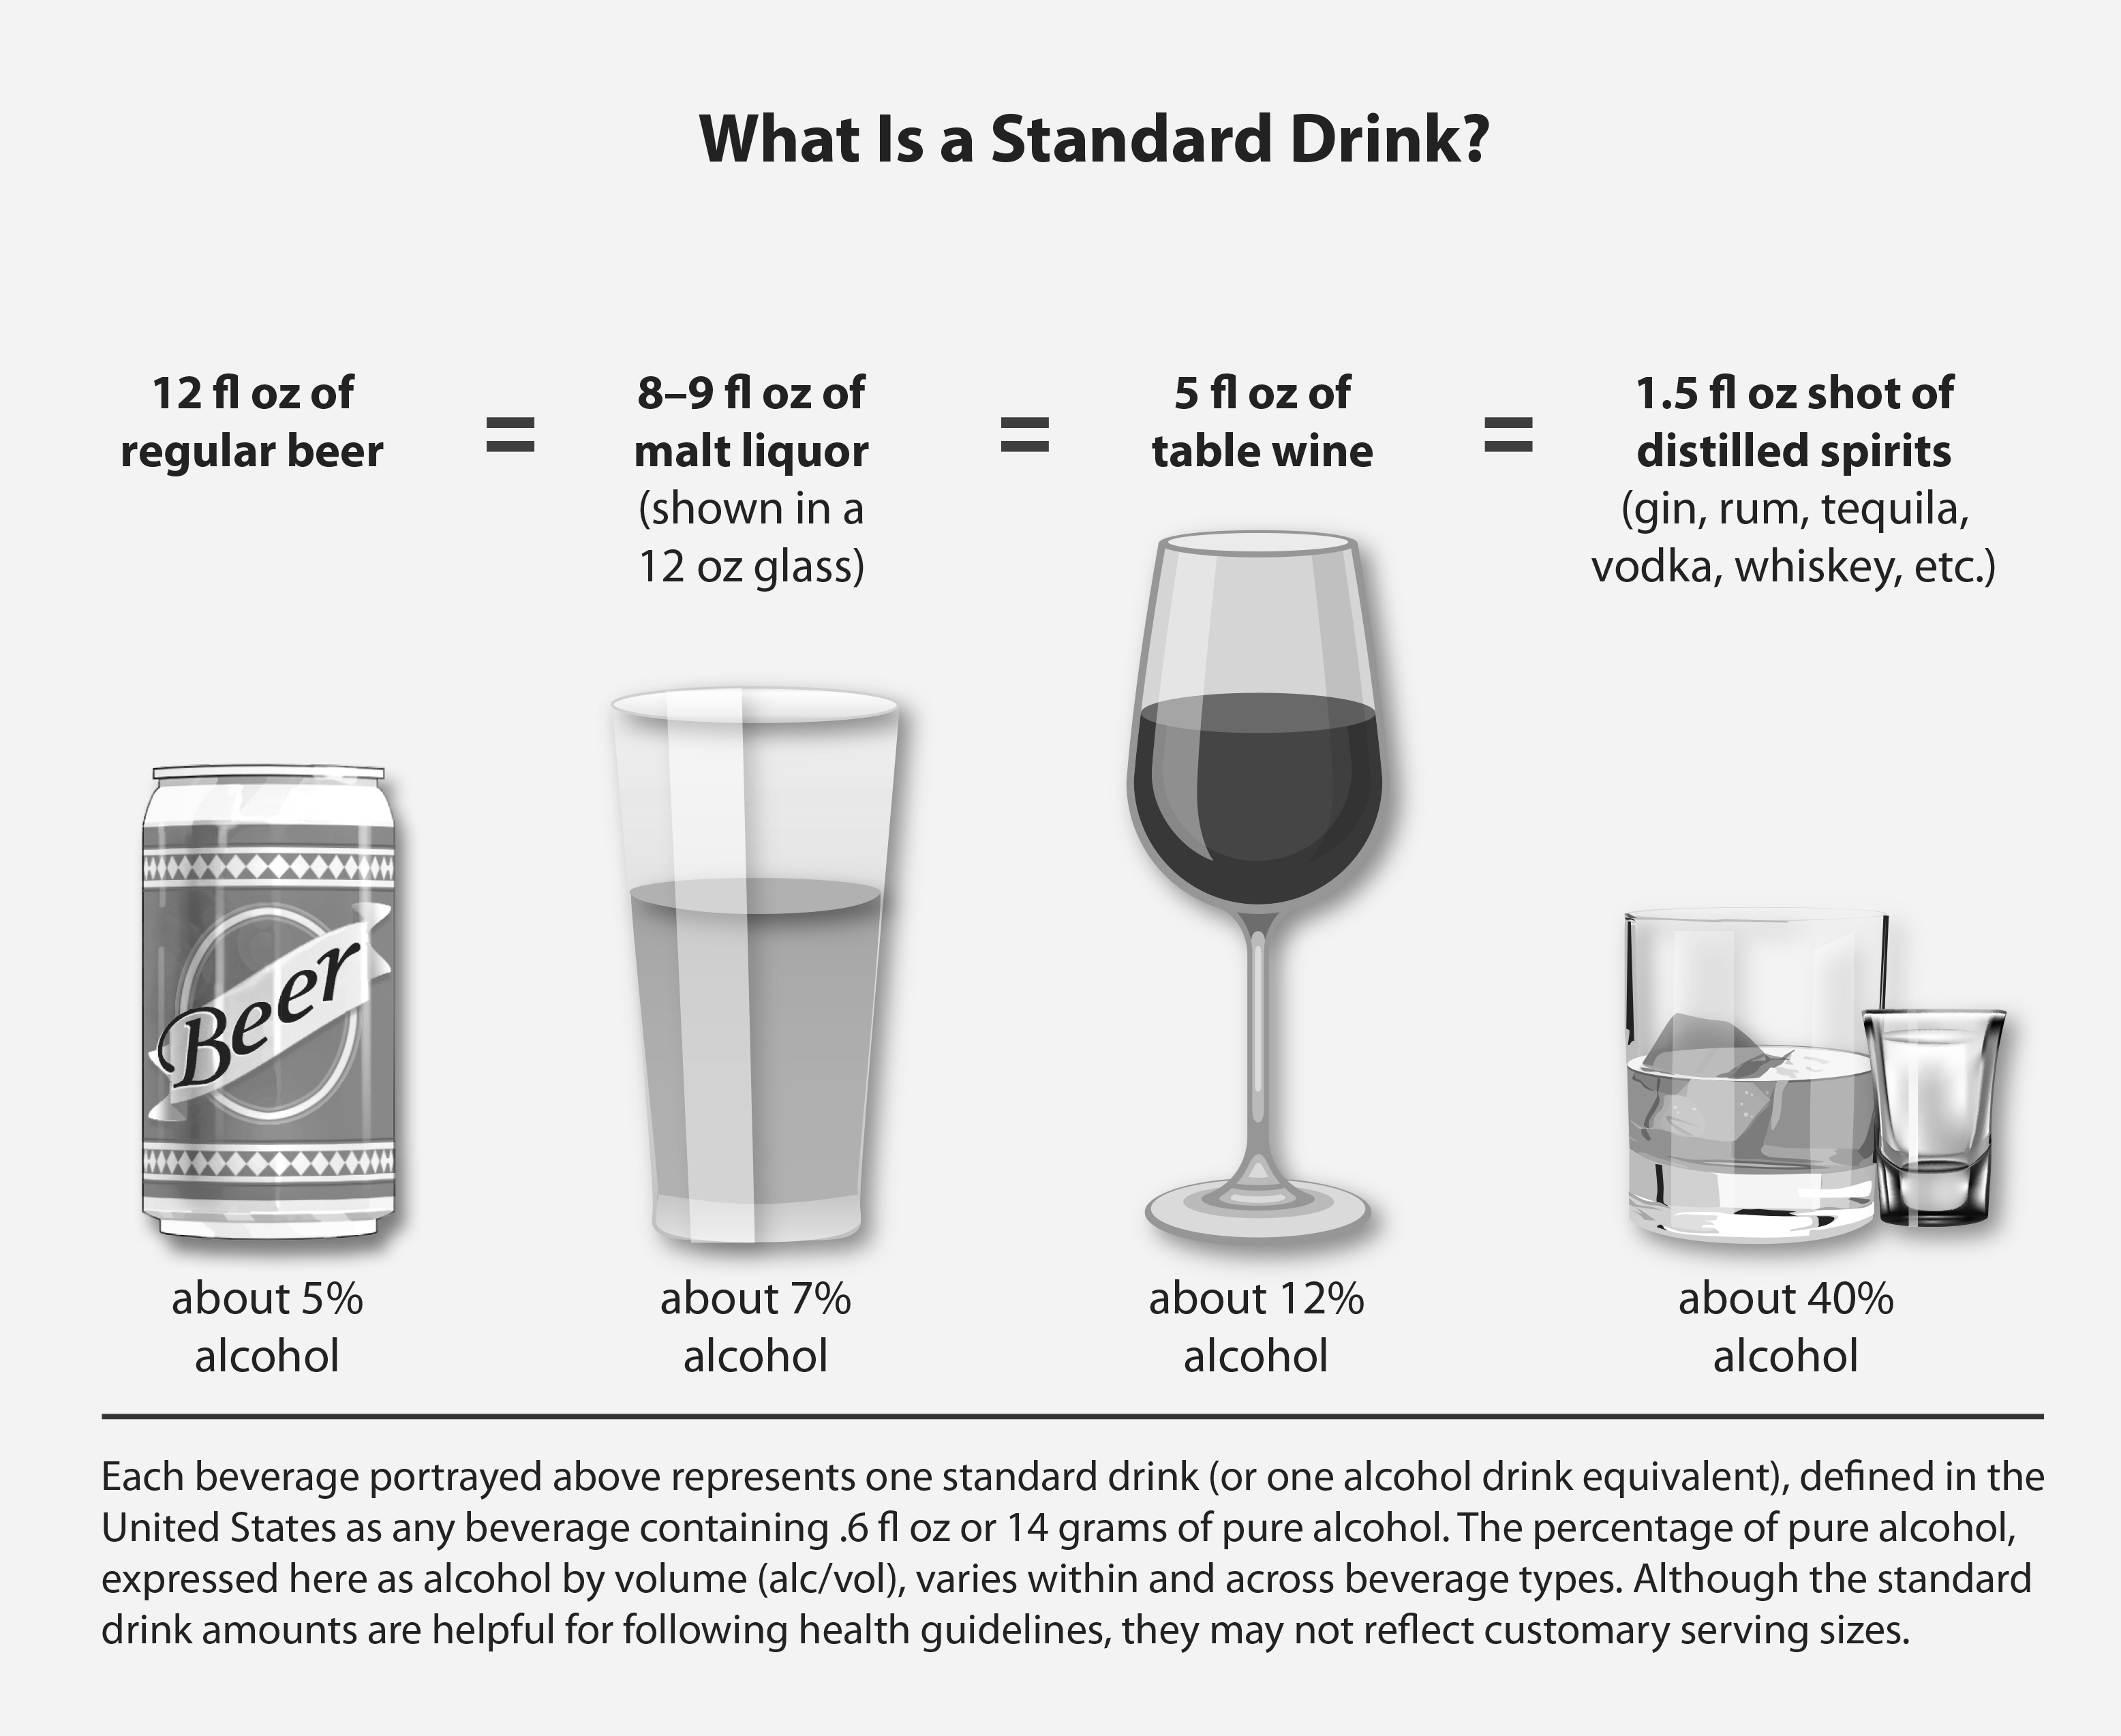 Source: National Institute on Alcohol Abuse & Alcoholism